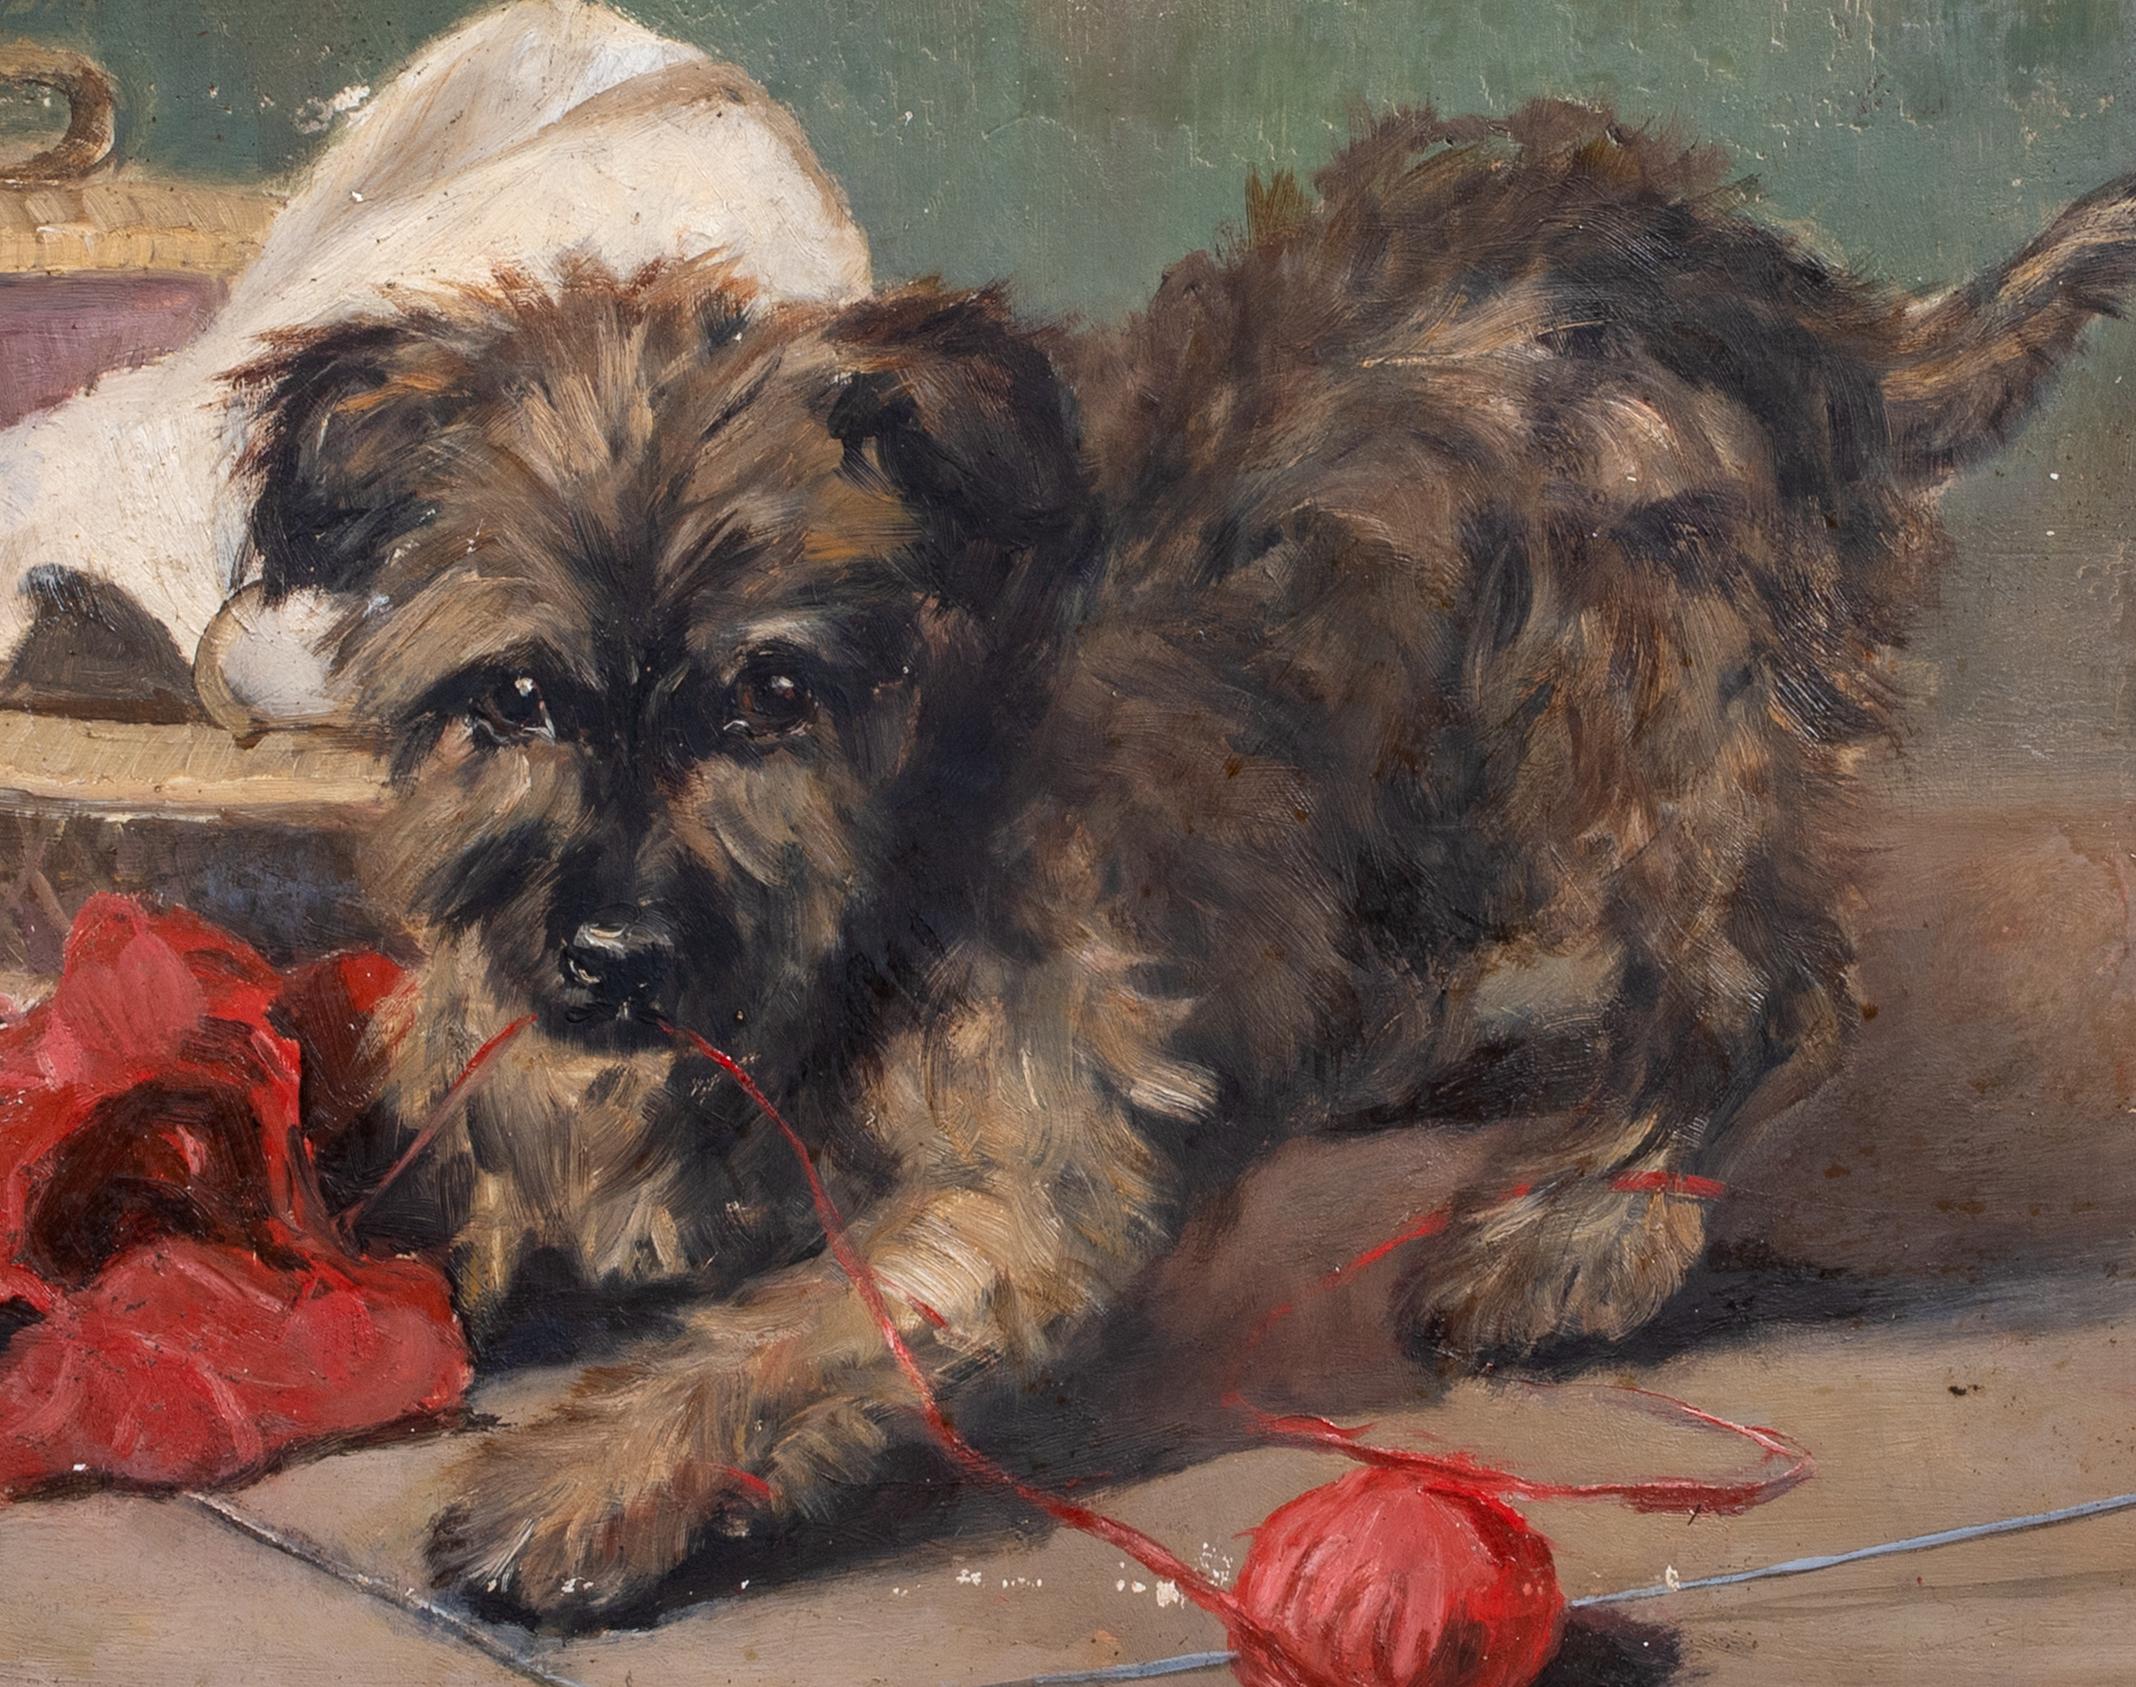 Portrait Of A Carin Terrier Puppy Playing, 19th Century  by Robert Smellie 1